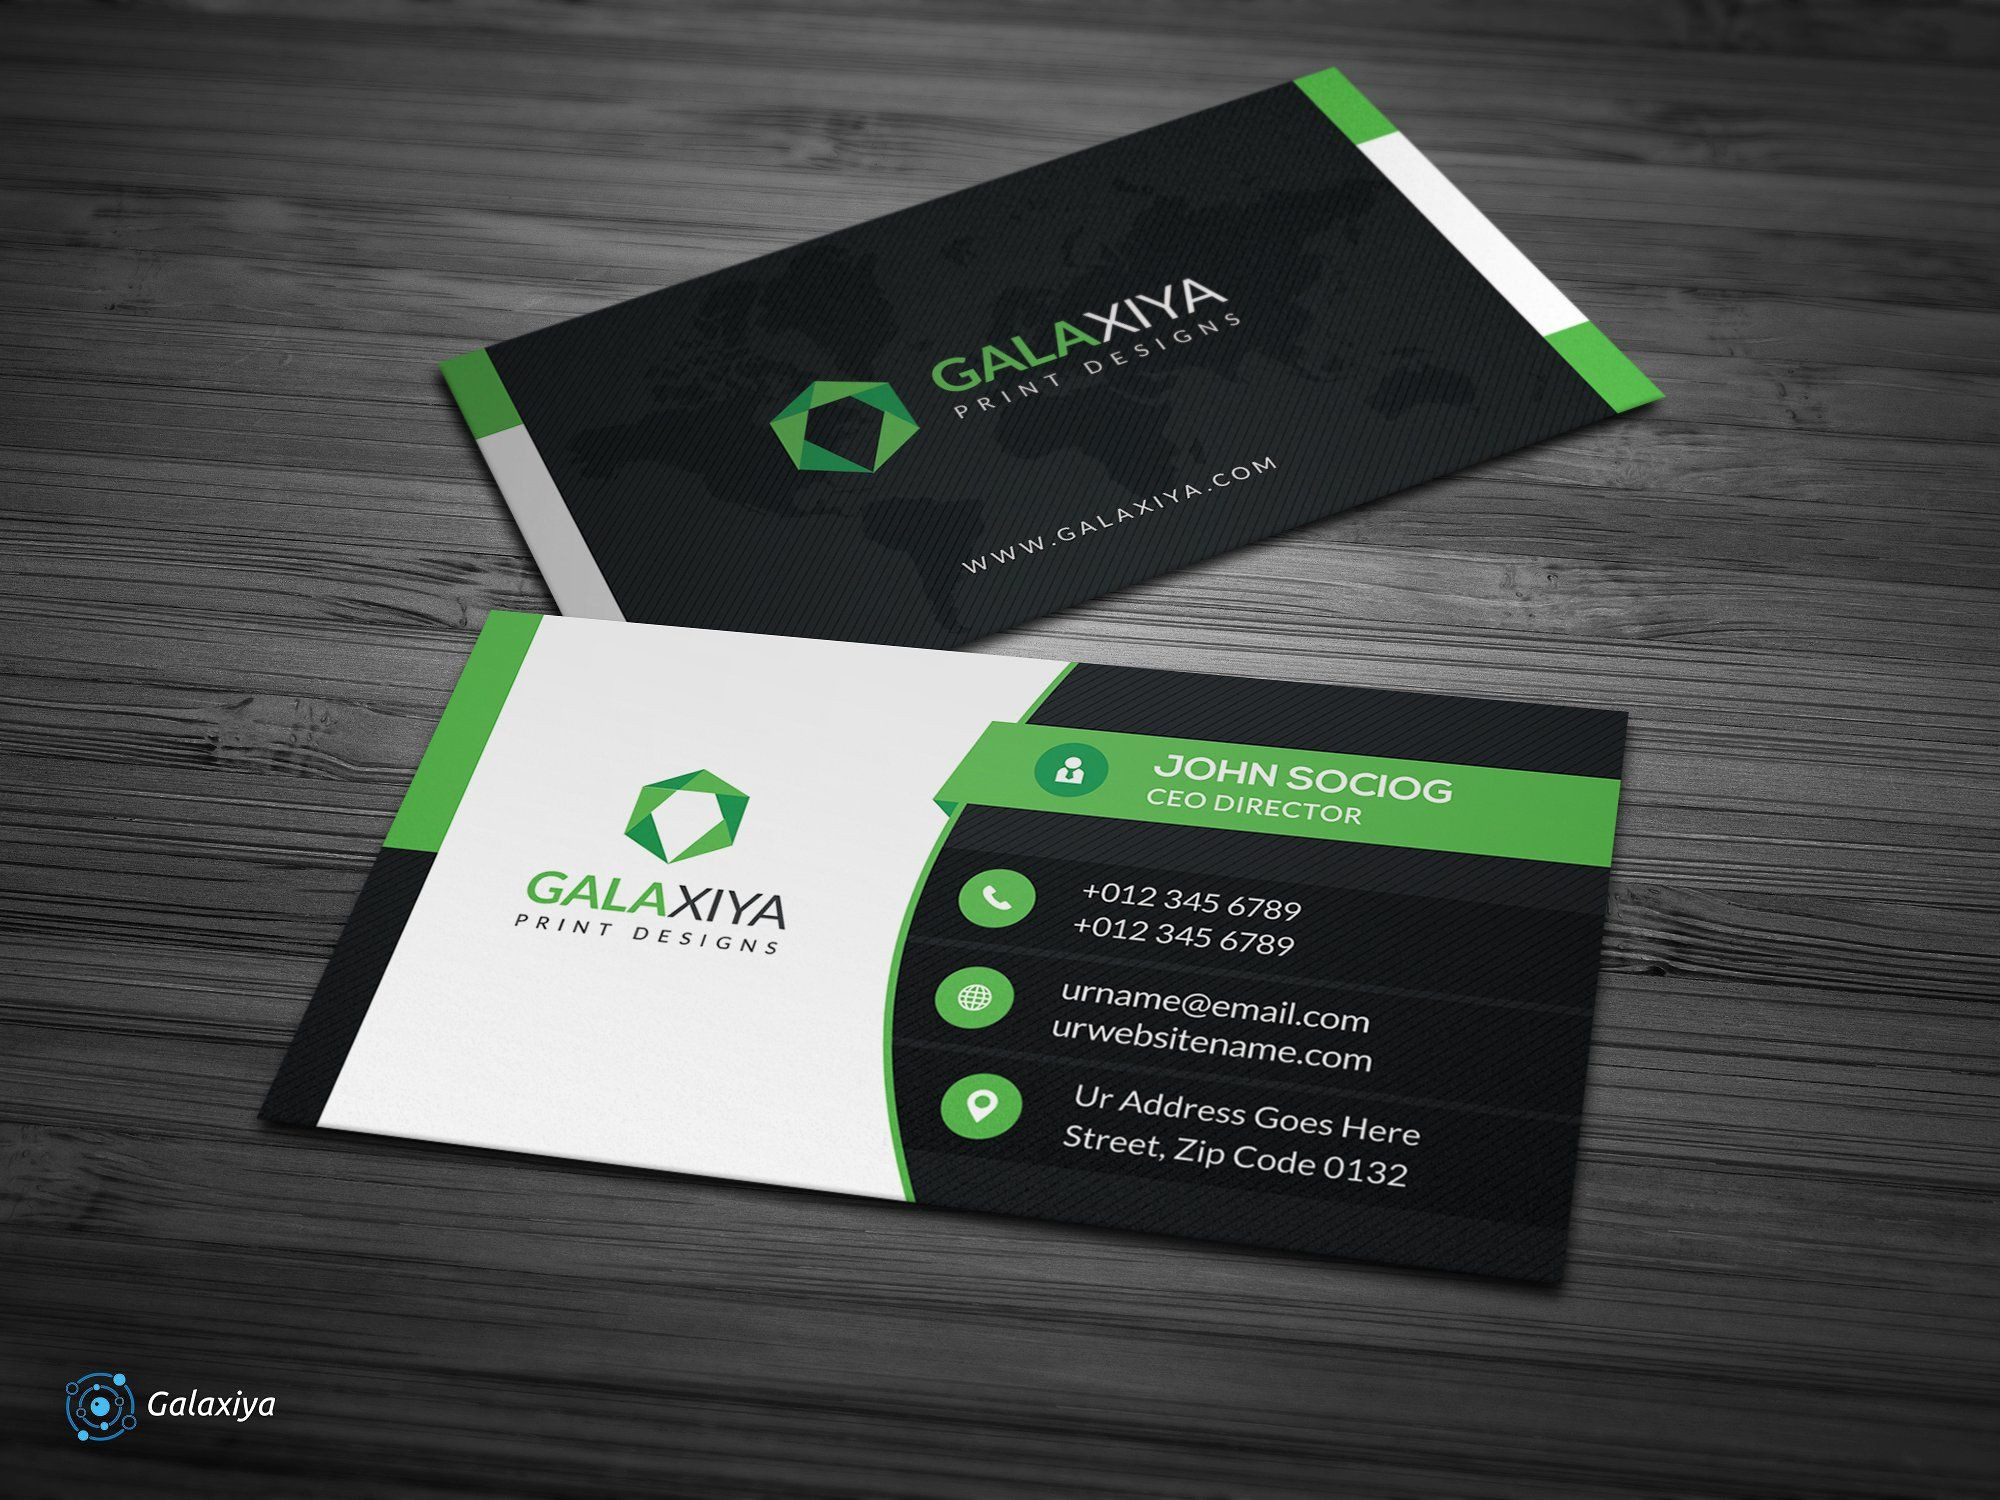 Creative Corporate Business Cards Edit Videos Easily Mode Of Business Card Presentation Template Psd